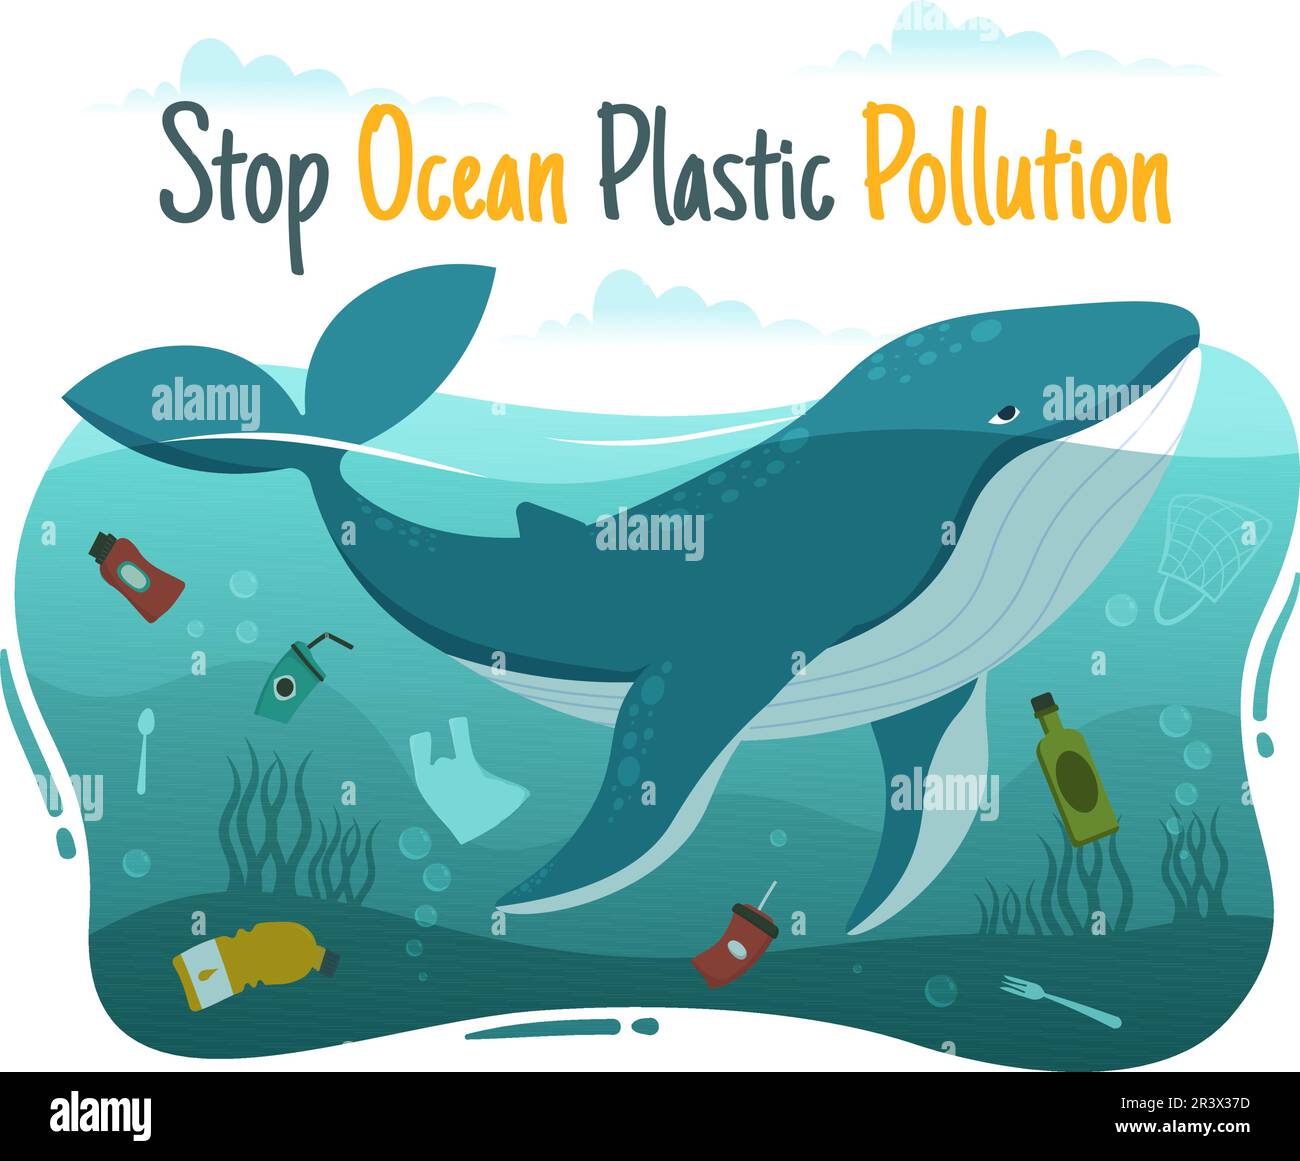 Stop Ocean Plastic Pollution Vector Illustration with Trash Under the ...